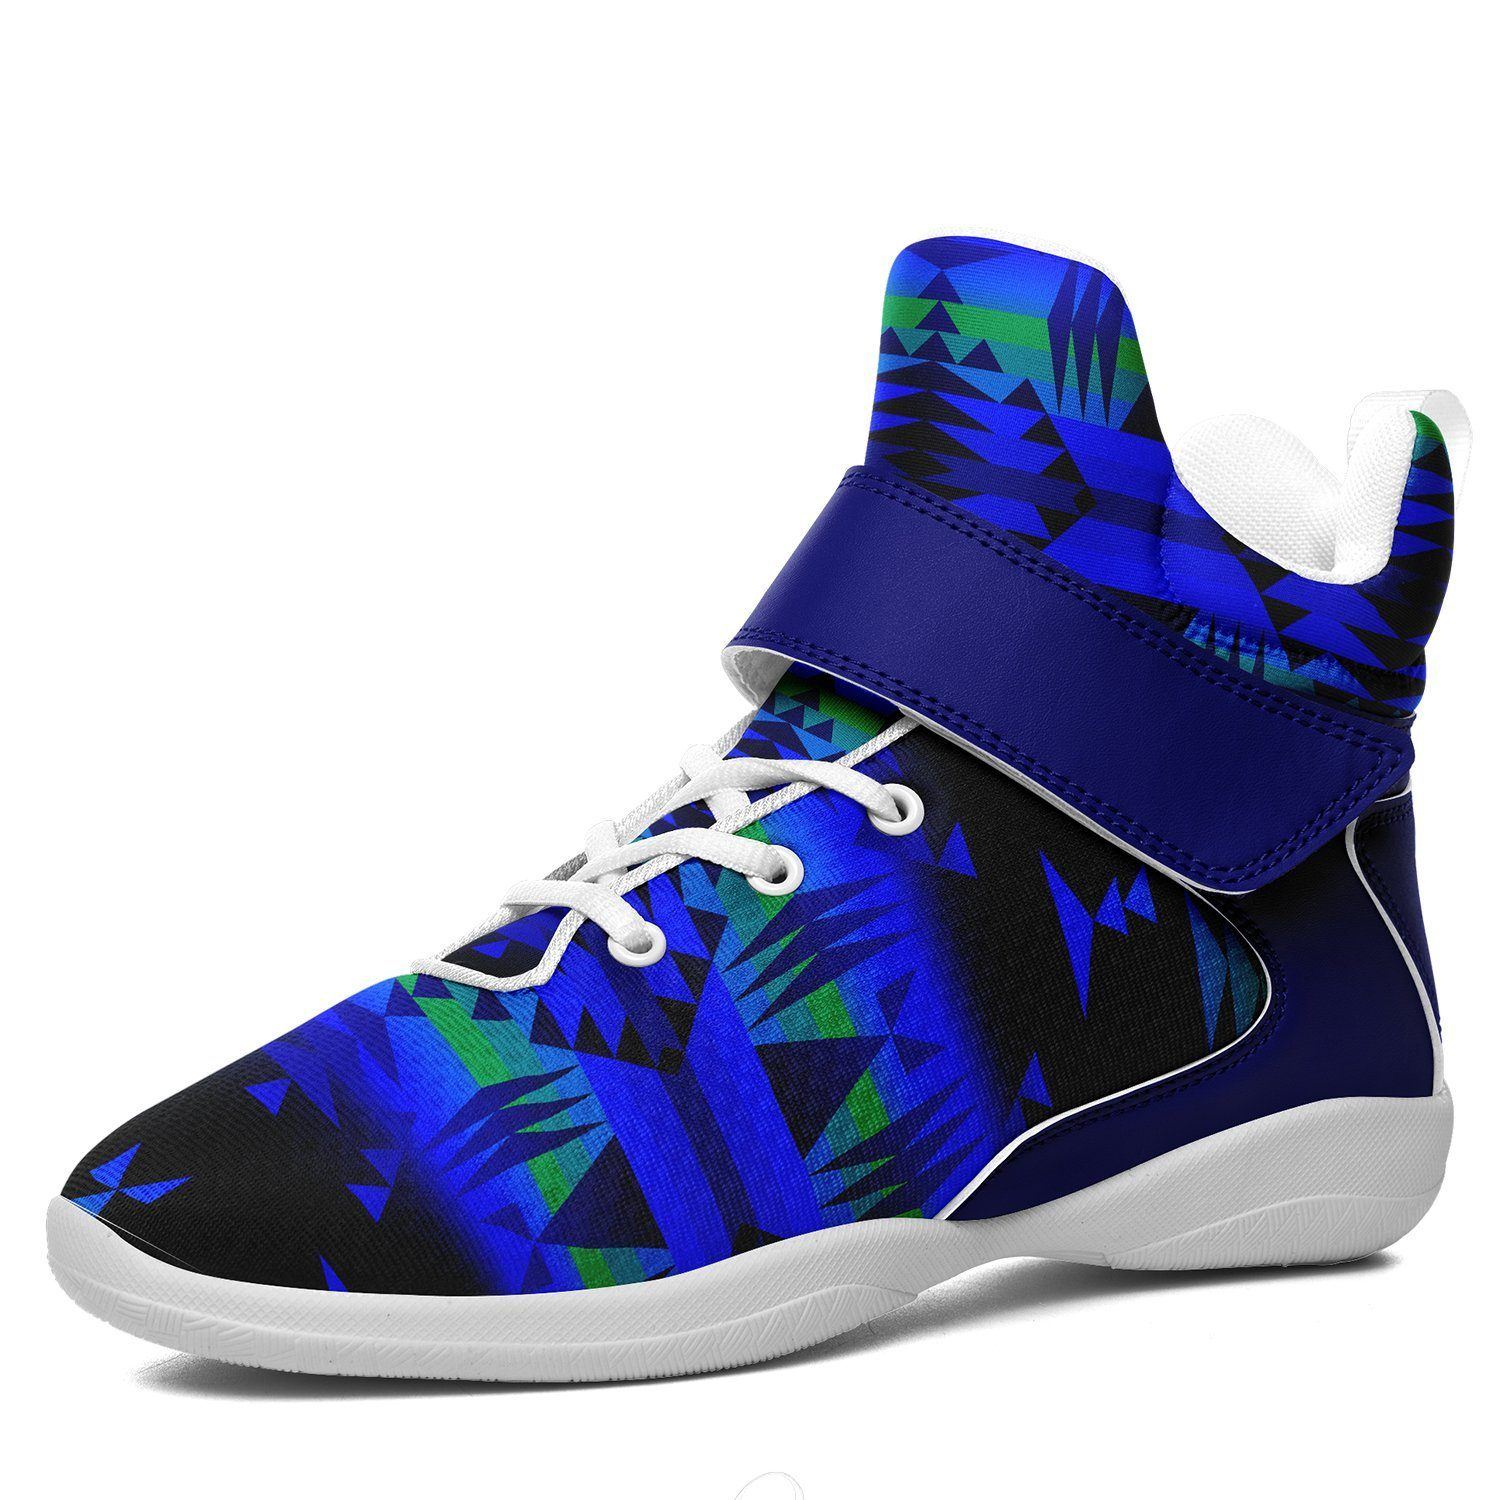 Between the Blue Ridge Mountains Ipottaa Basketball / Sport High Top Shoes - White Sole 49 Dzine US Men 7 / EUR 40 White Sole with Blue Strap 